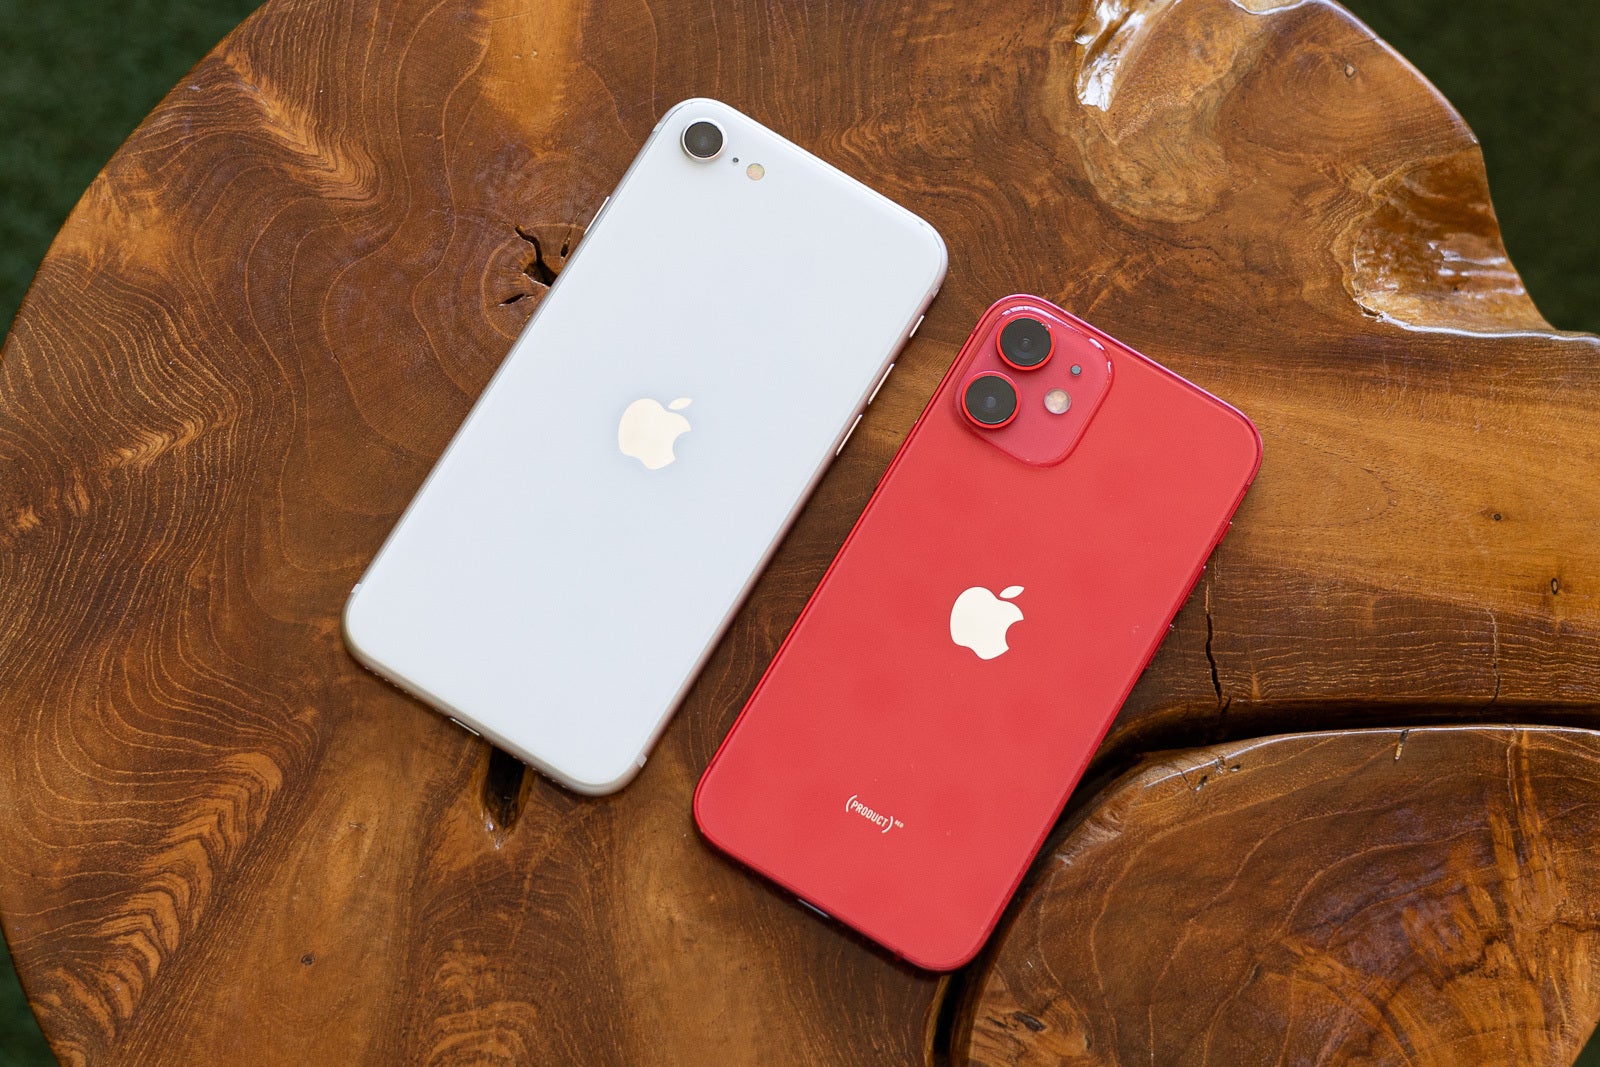 Left - iPhone SE; Right - iPhone 12 mini - Prediction: the iPhone mini is not dead, it will rise from the ashes